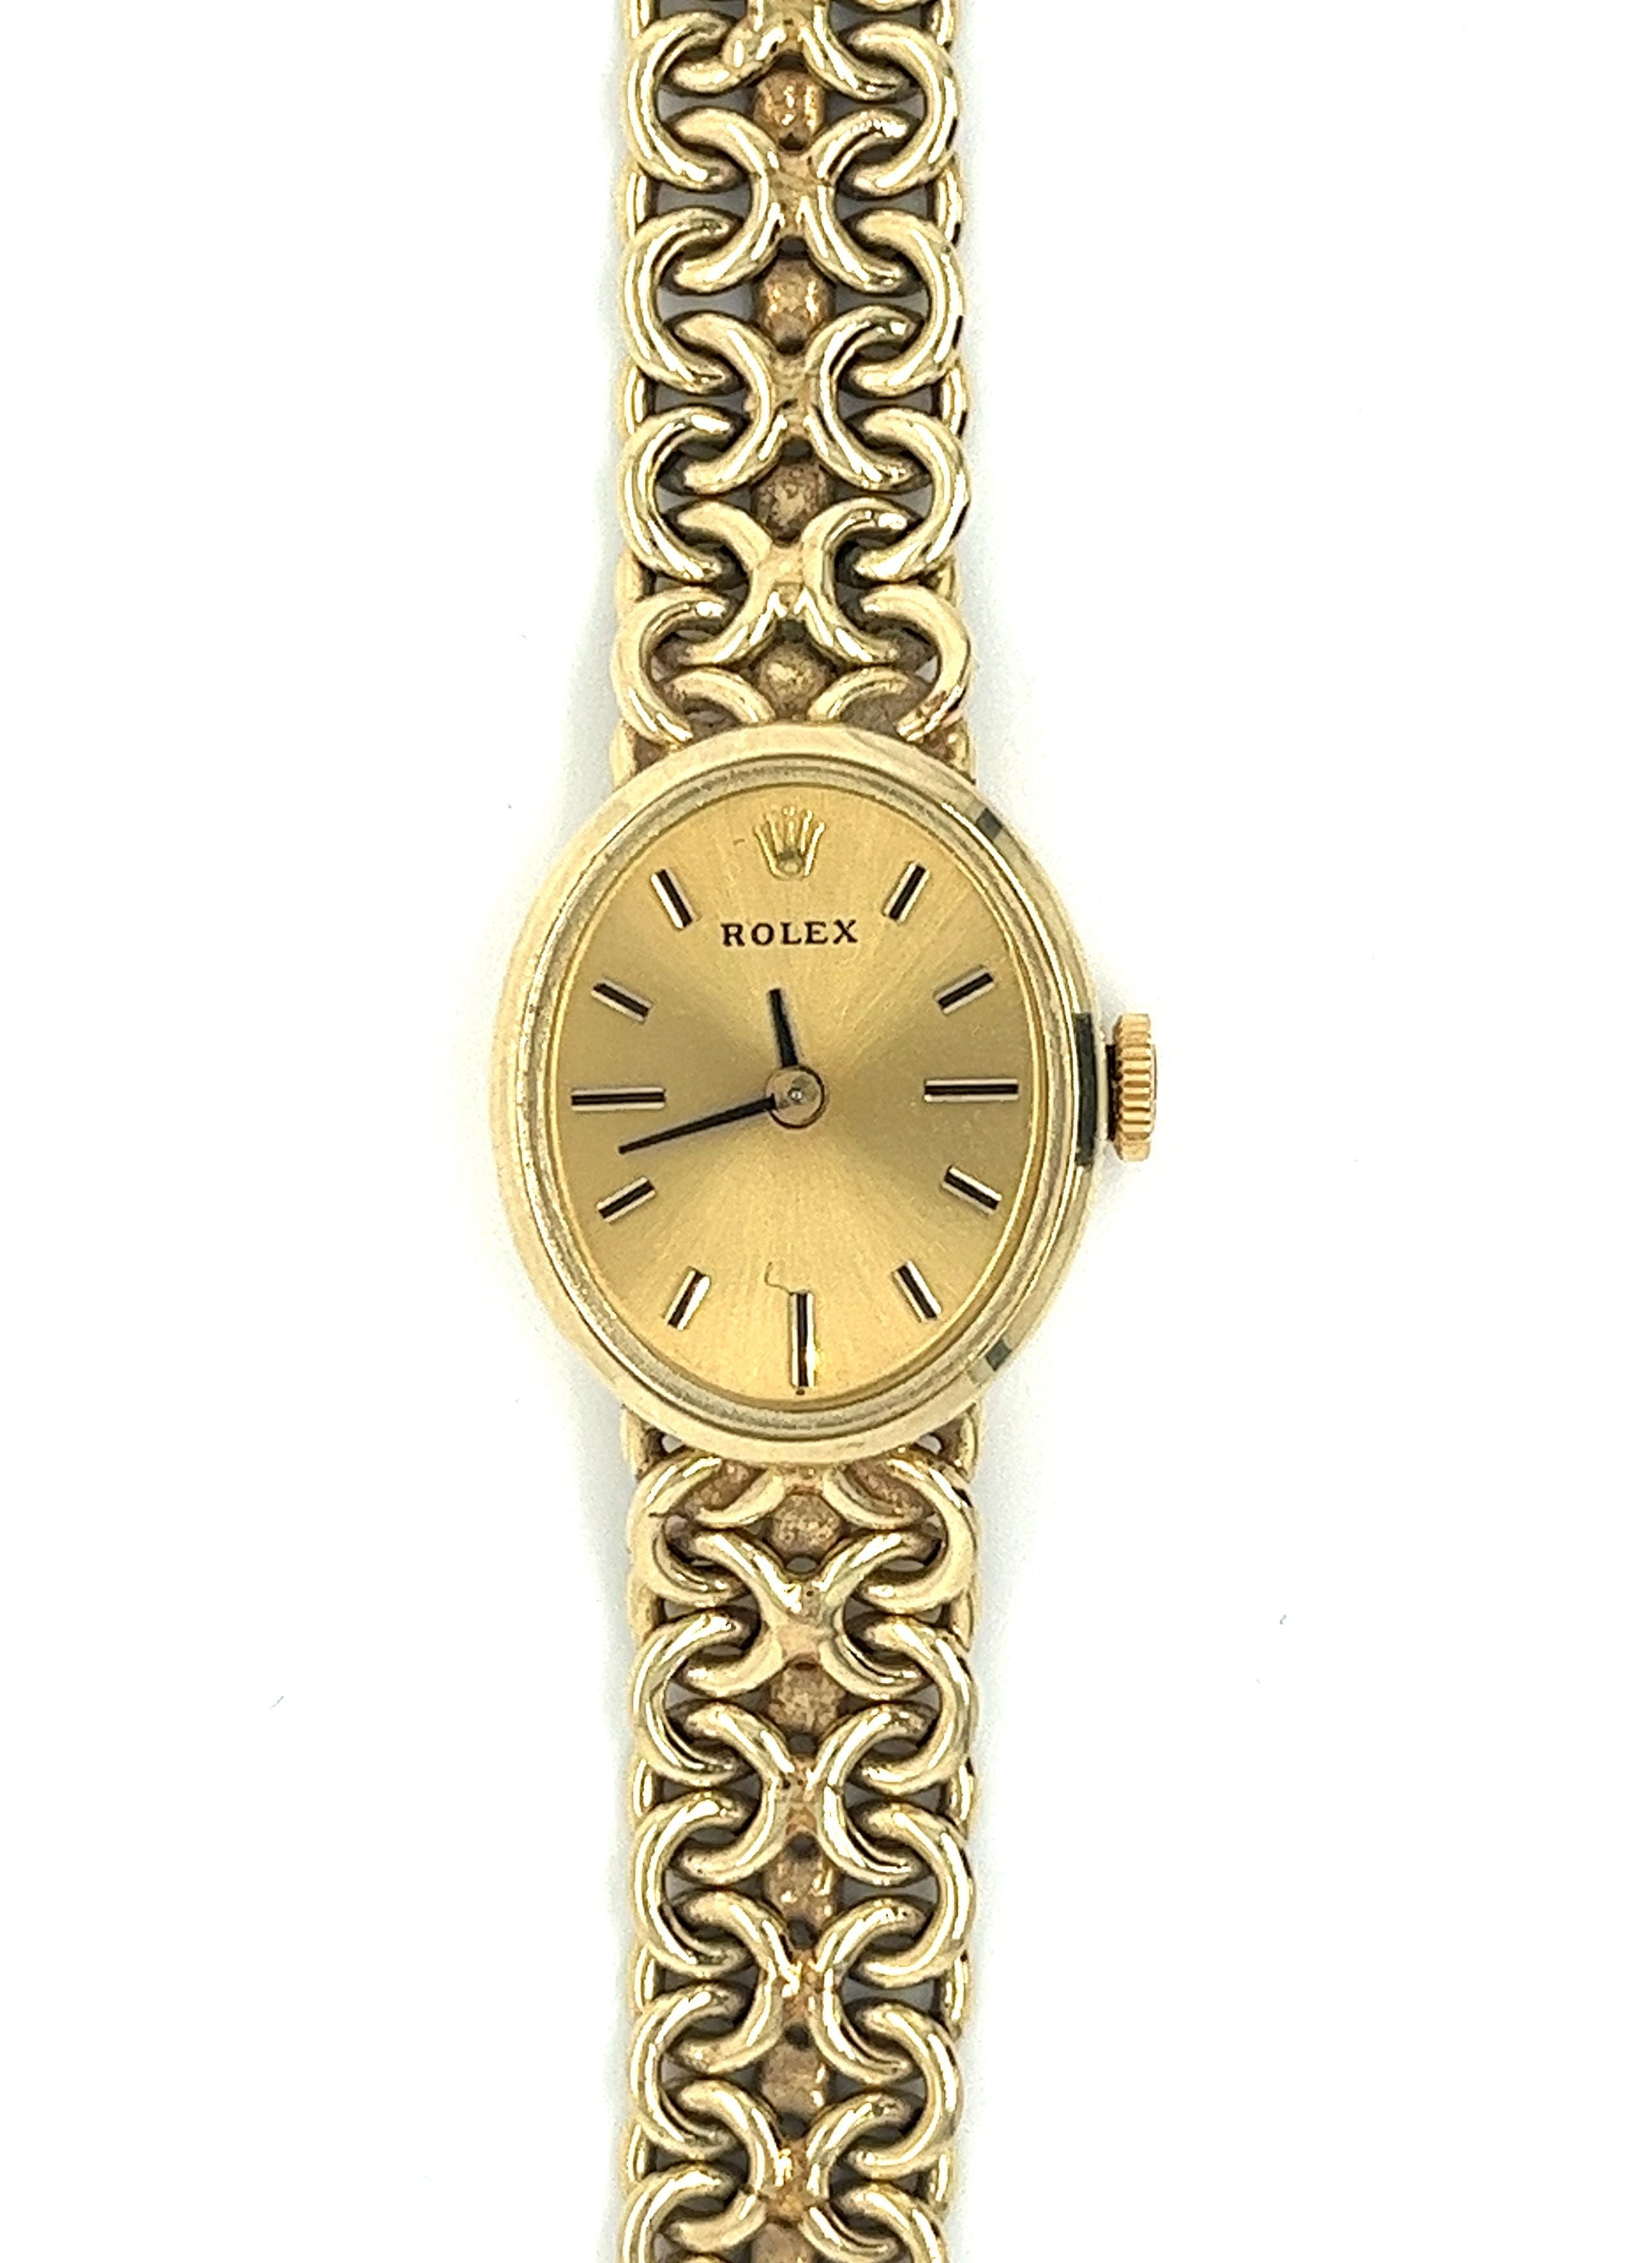 Vintage-Rolex-17_5MM-Manual-Wind-Ladies-Watch-in-14K-Gold-With-MilaneseMesh-Band-Circa-1960-Watches.jpg